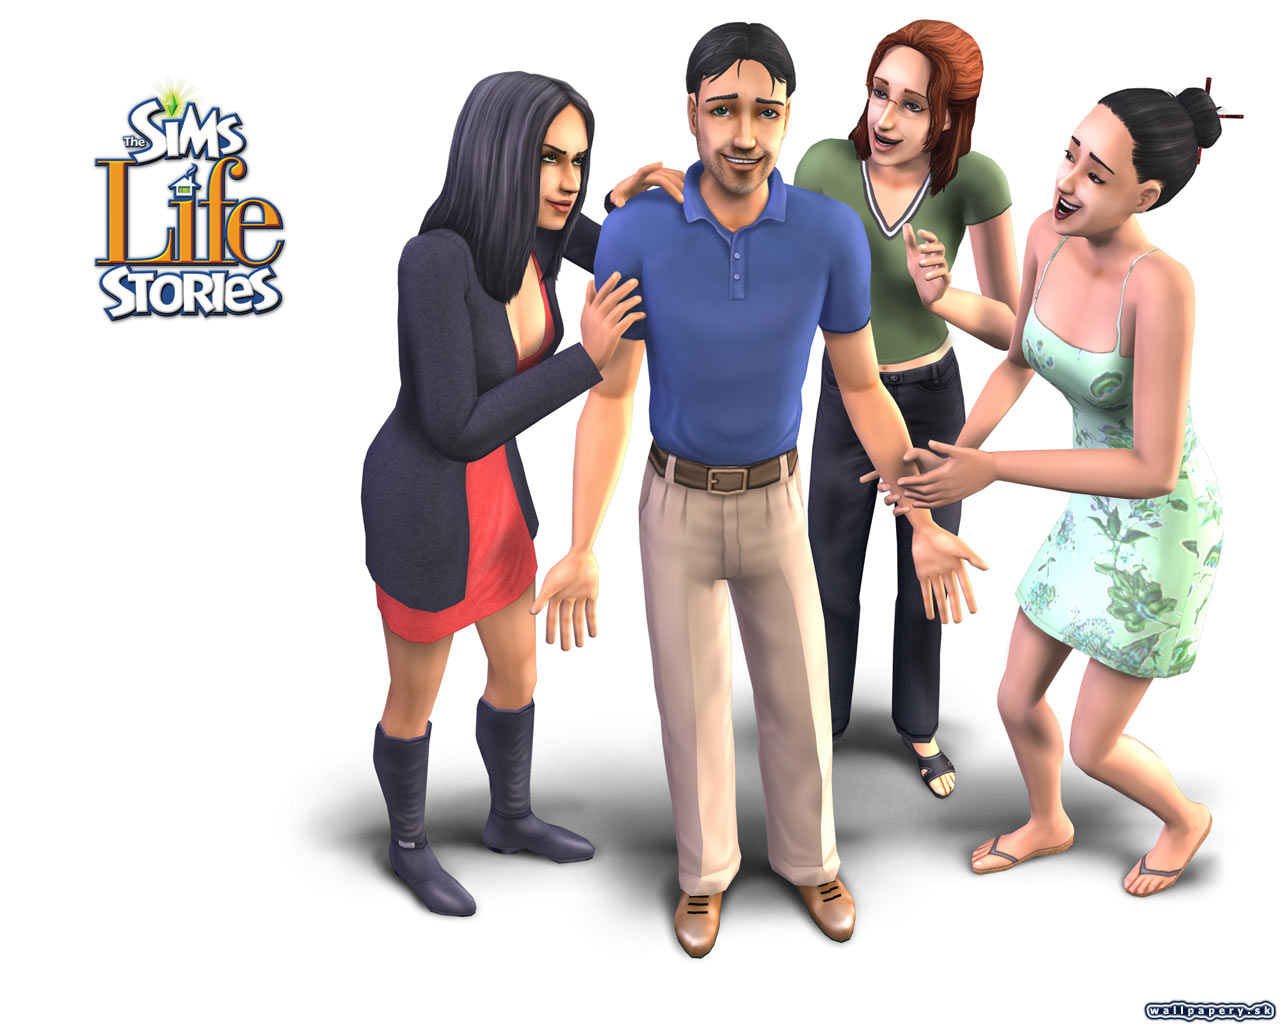 The Sims Life Stories - wallpaper 3